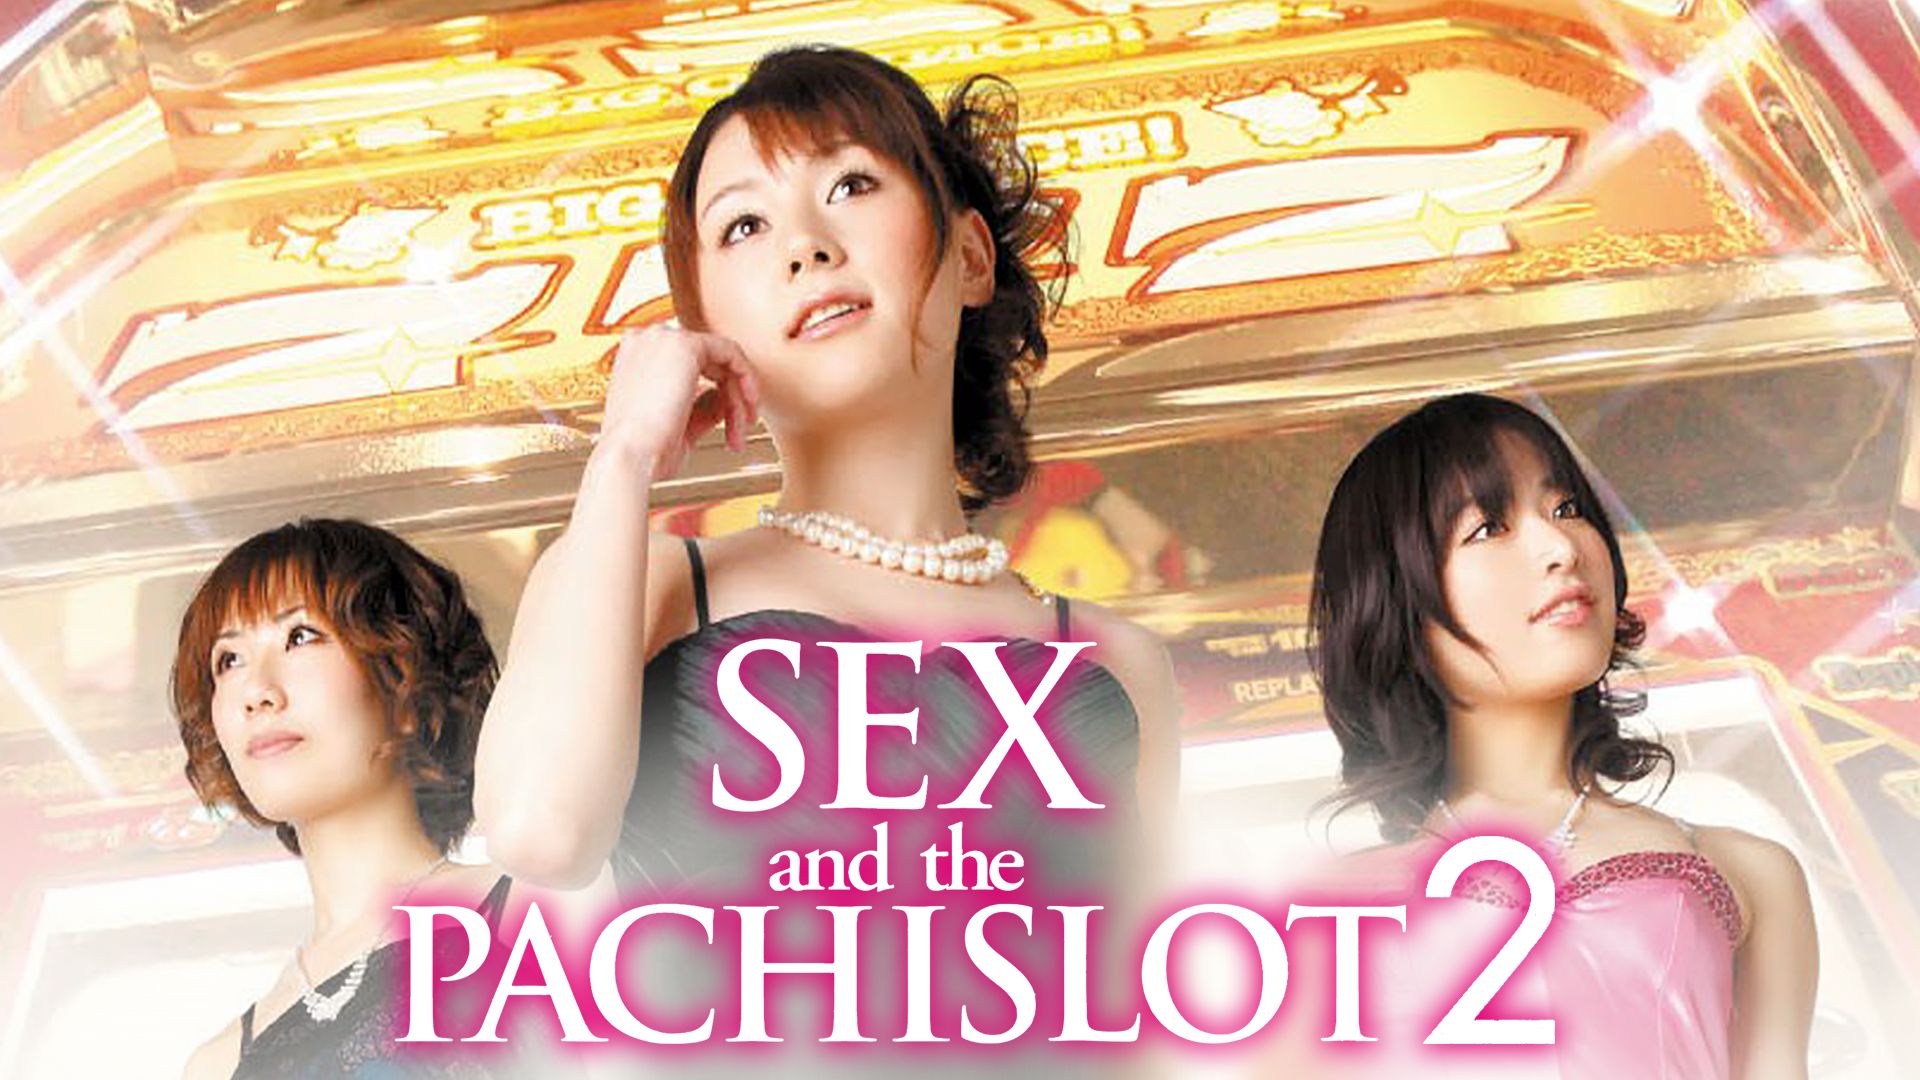 SEX and the PACHISLOT 2